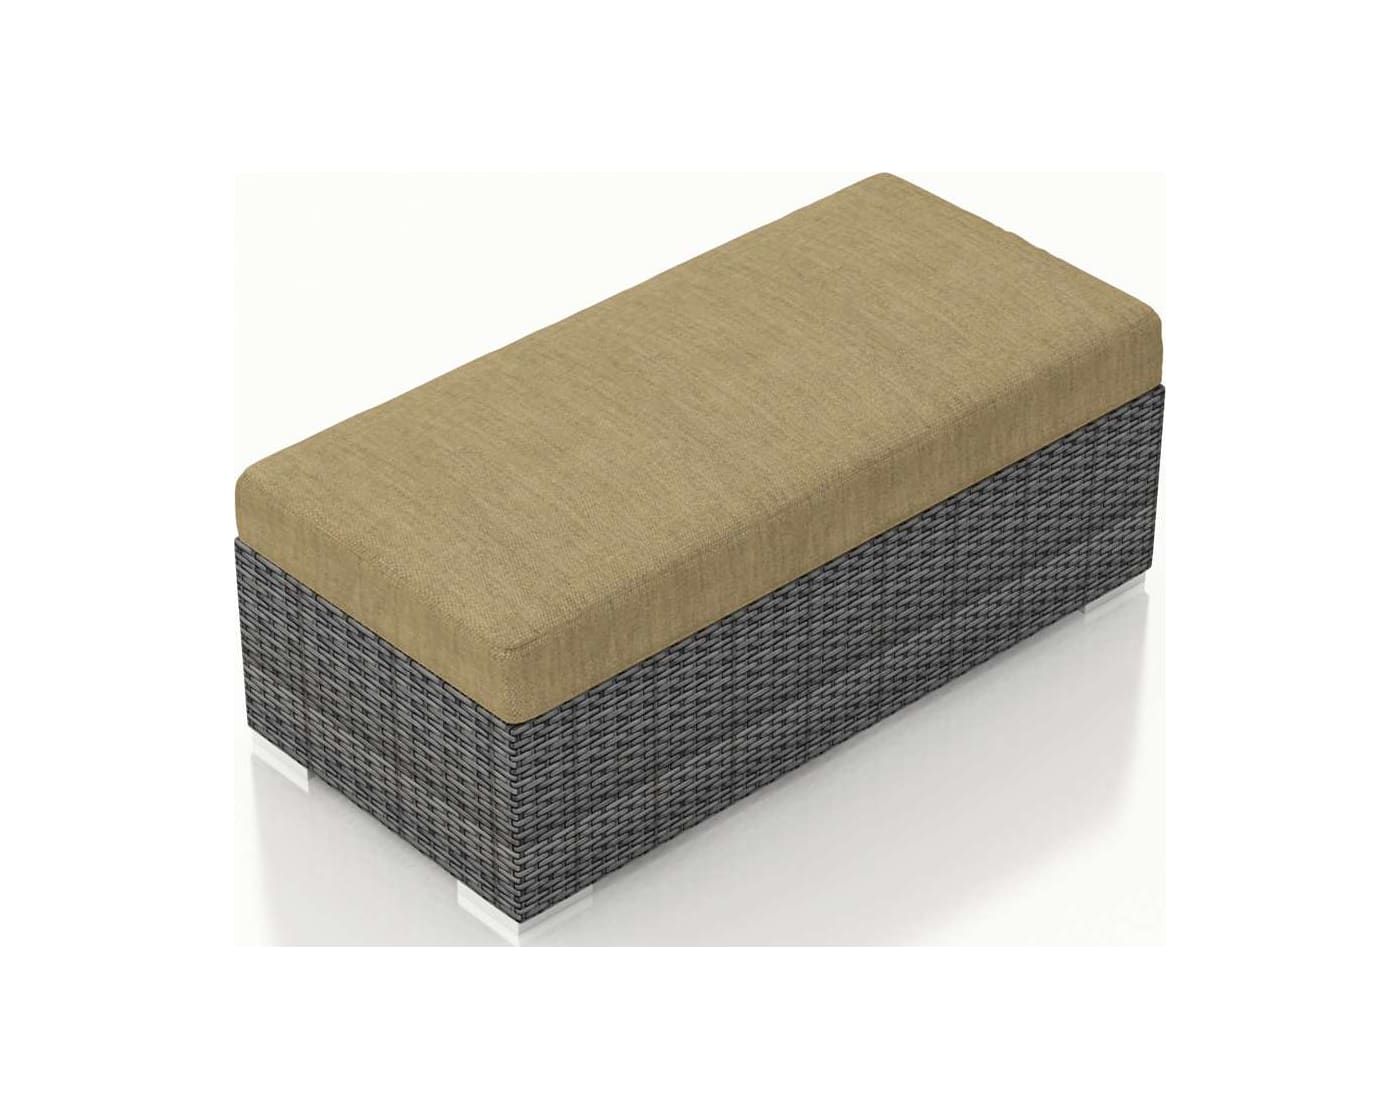 Harmonia Living District Textured Slate Double Ottoman With Beige With Textured Tan Cylinder Pouf Ottomans (View 1 of 20)